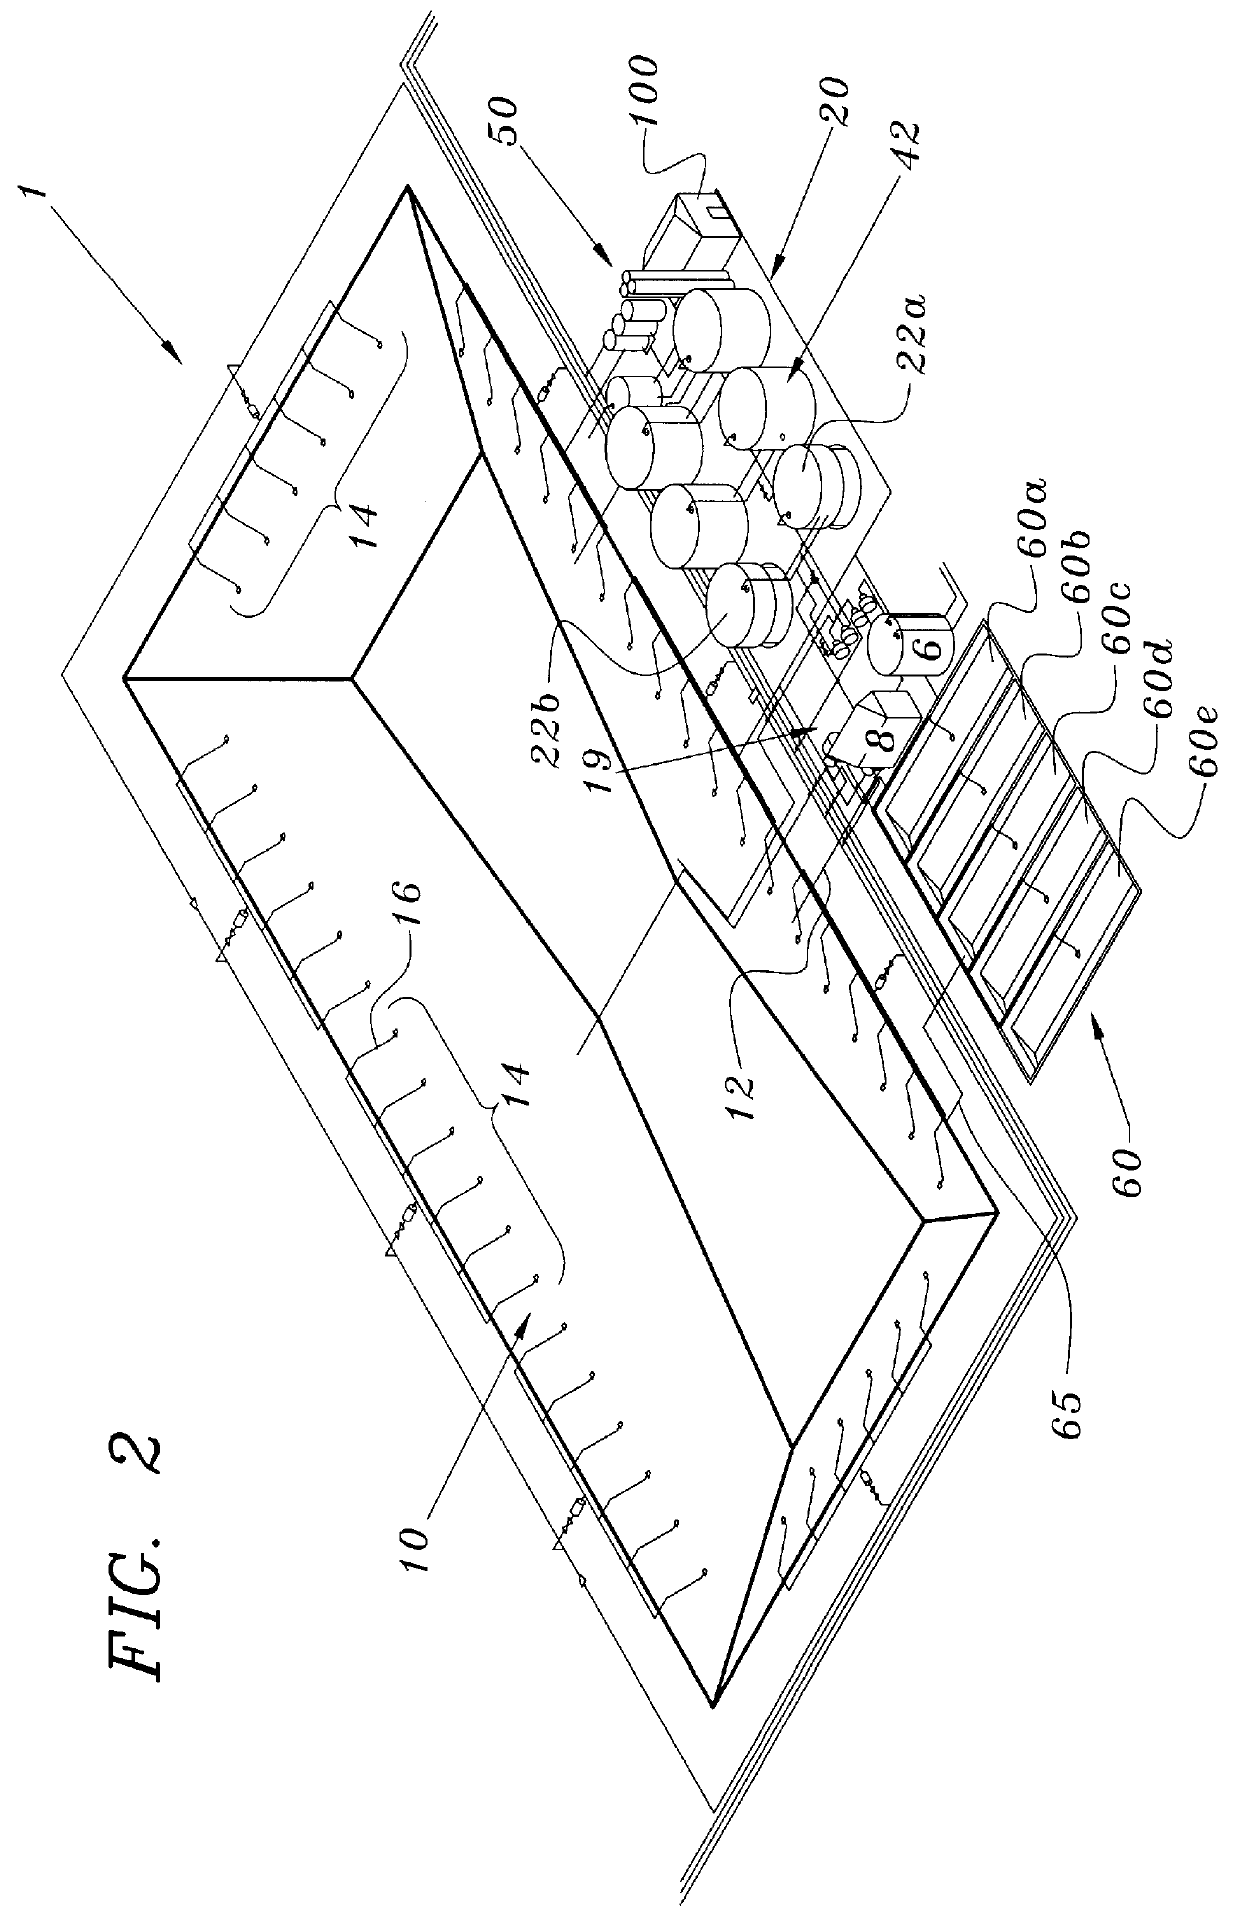 Apparatus and method for purification of agricultural animal waste